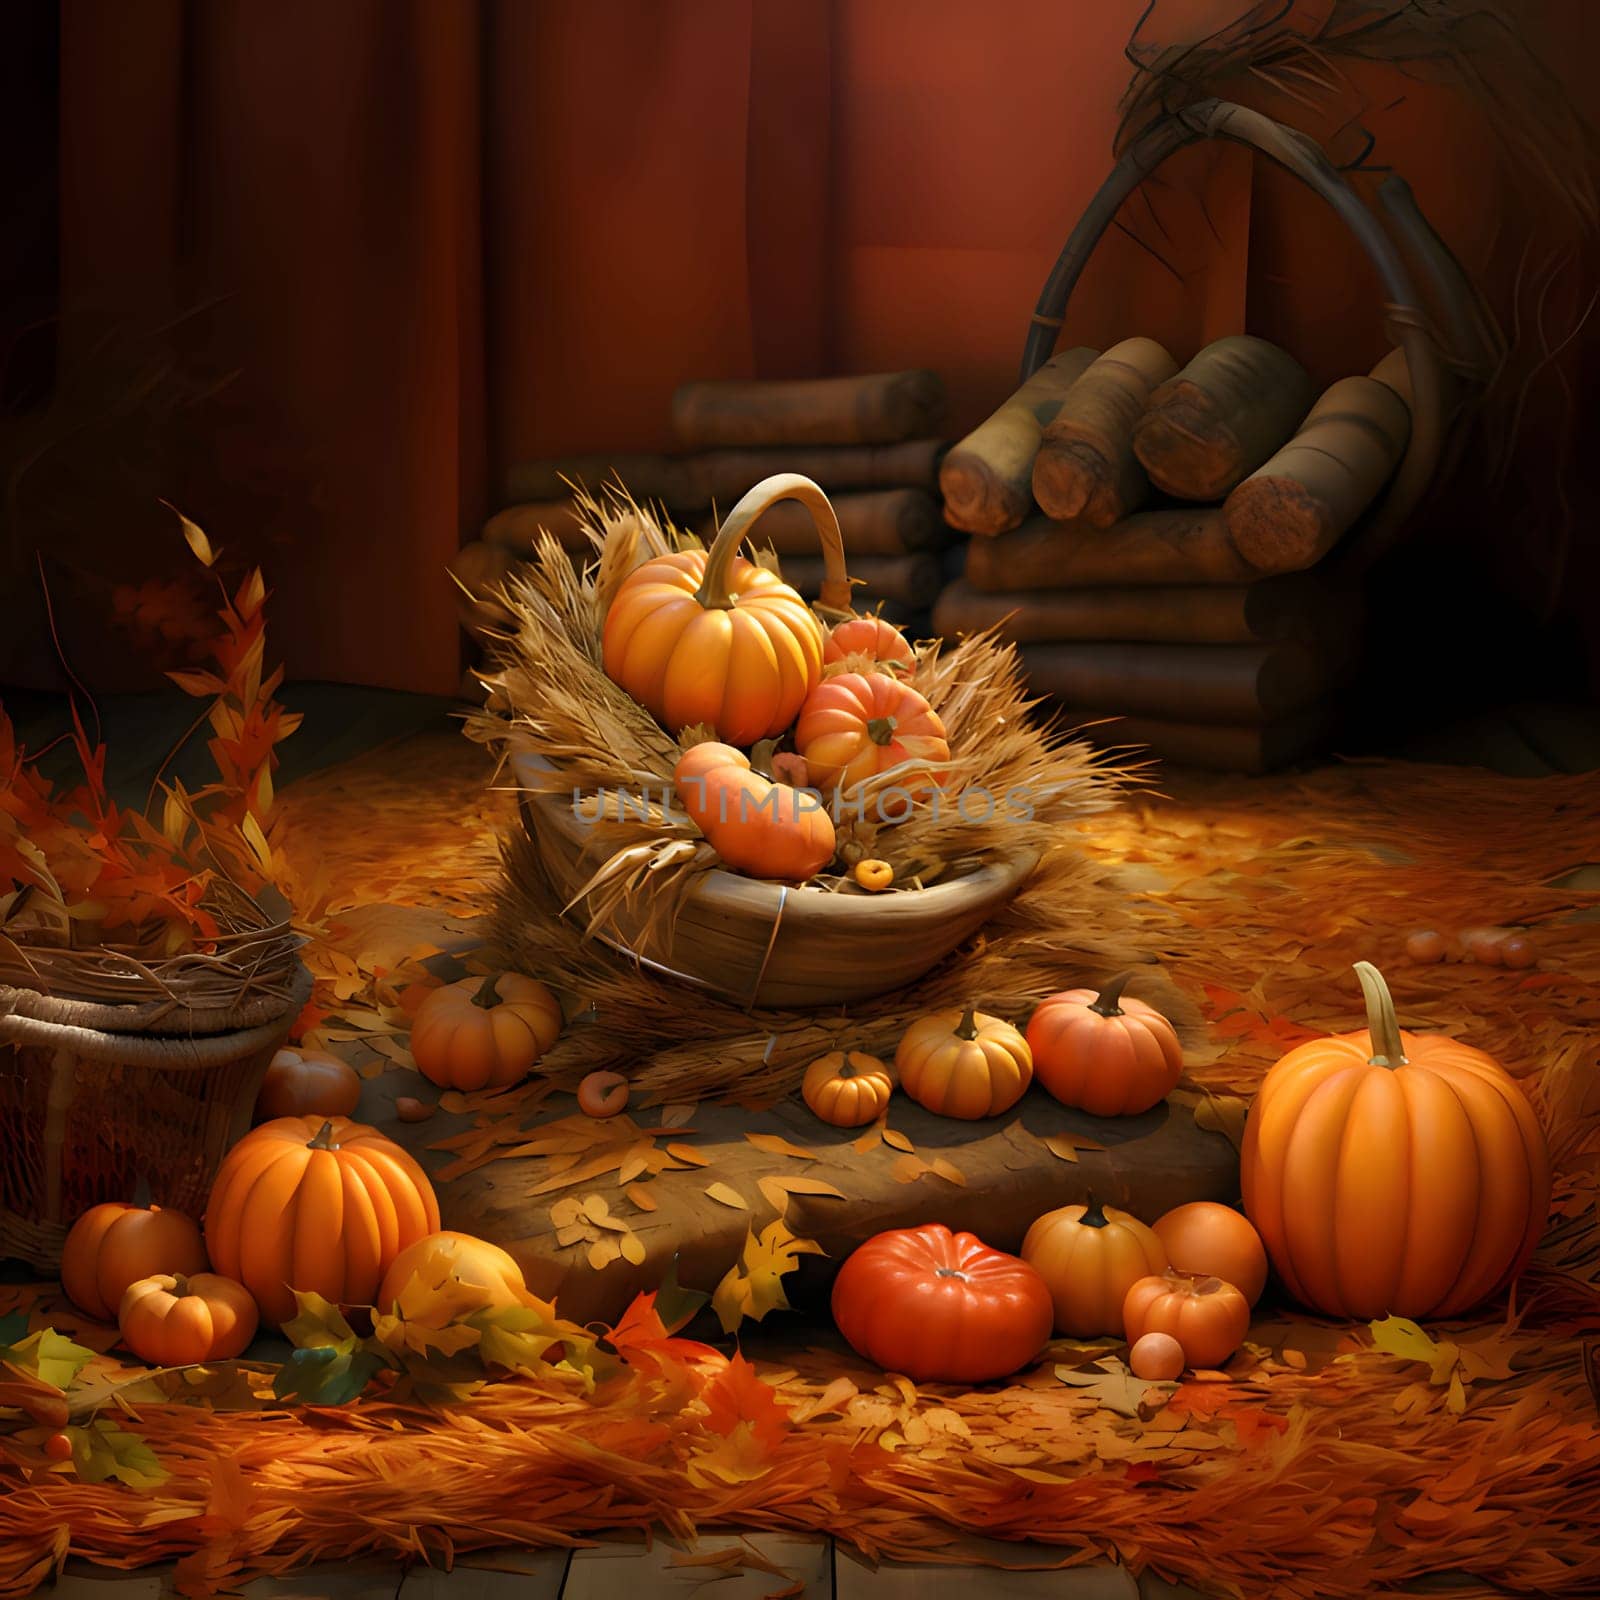 On wooden boards, barn orange pumpkins, autumn scattered leaves, wicker baskets, and in them grain and pumpkins. Pumpkin as a dish of thanksgiving for the harvest. An atmosphere of joy and celebration.